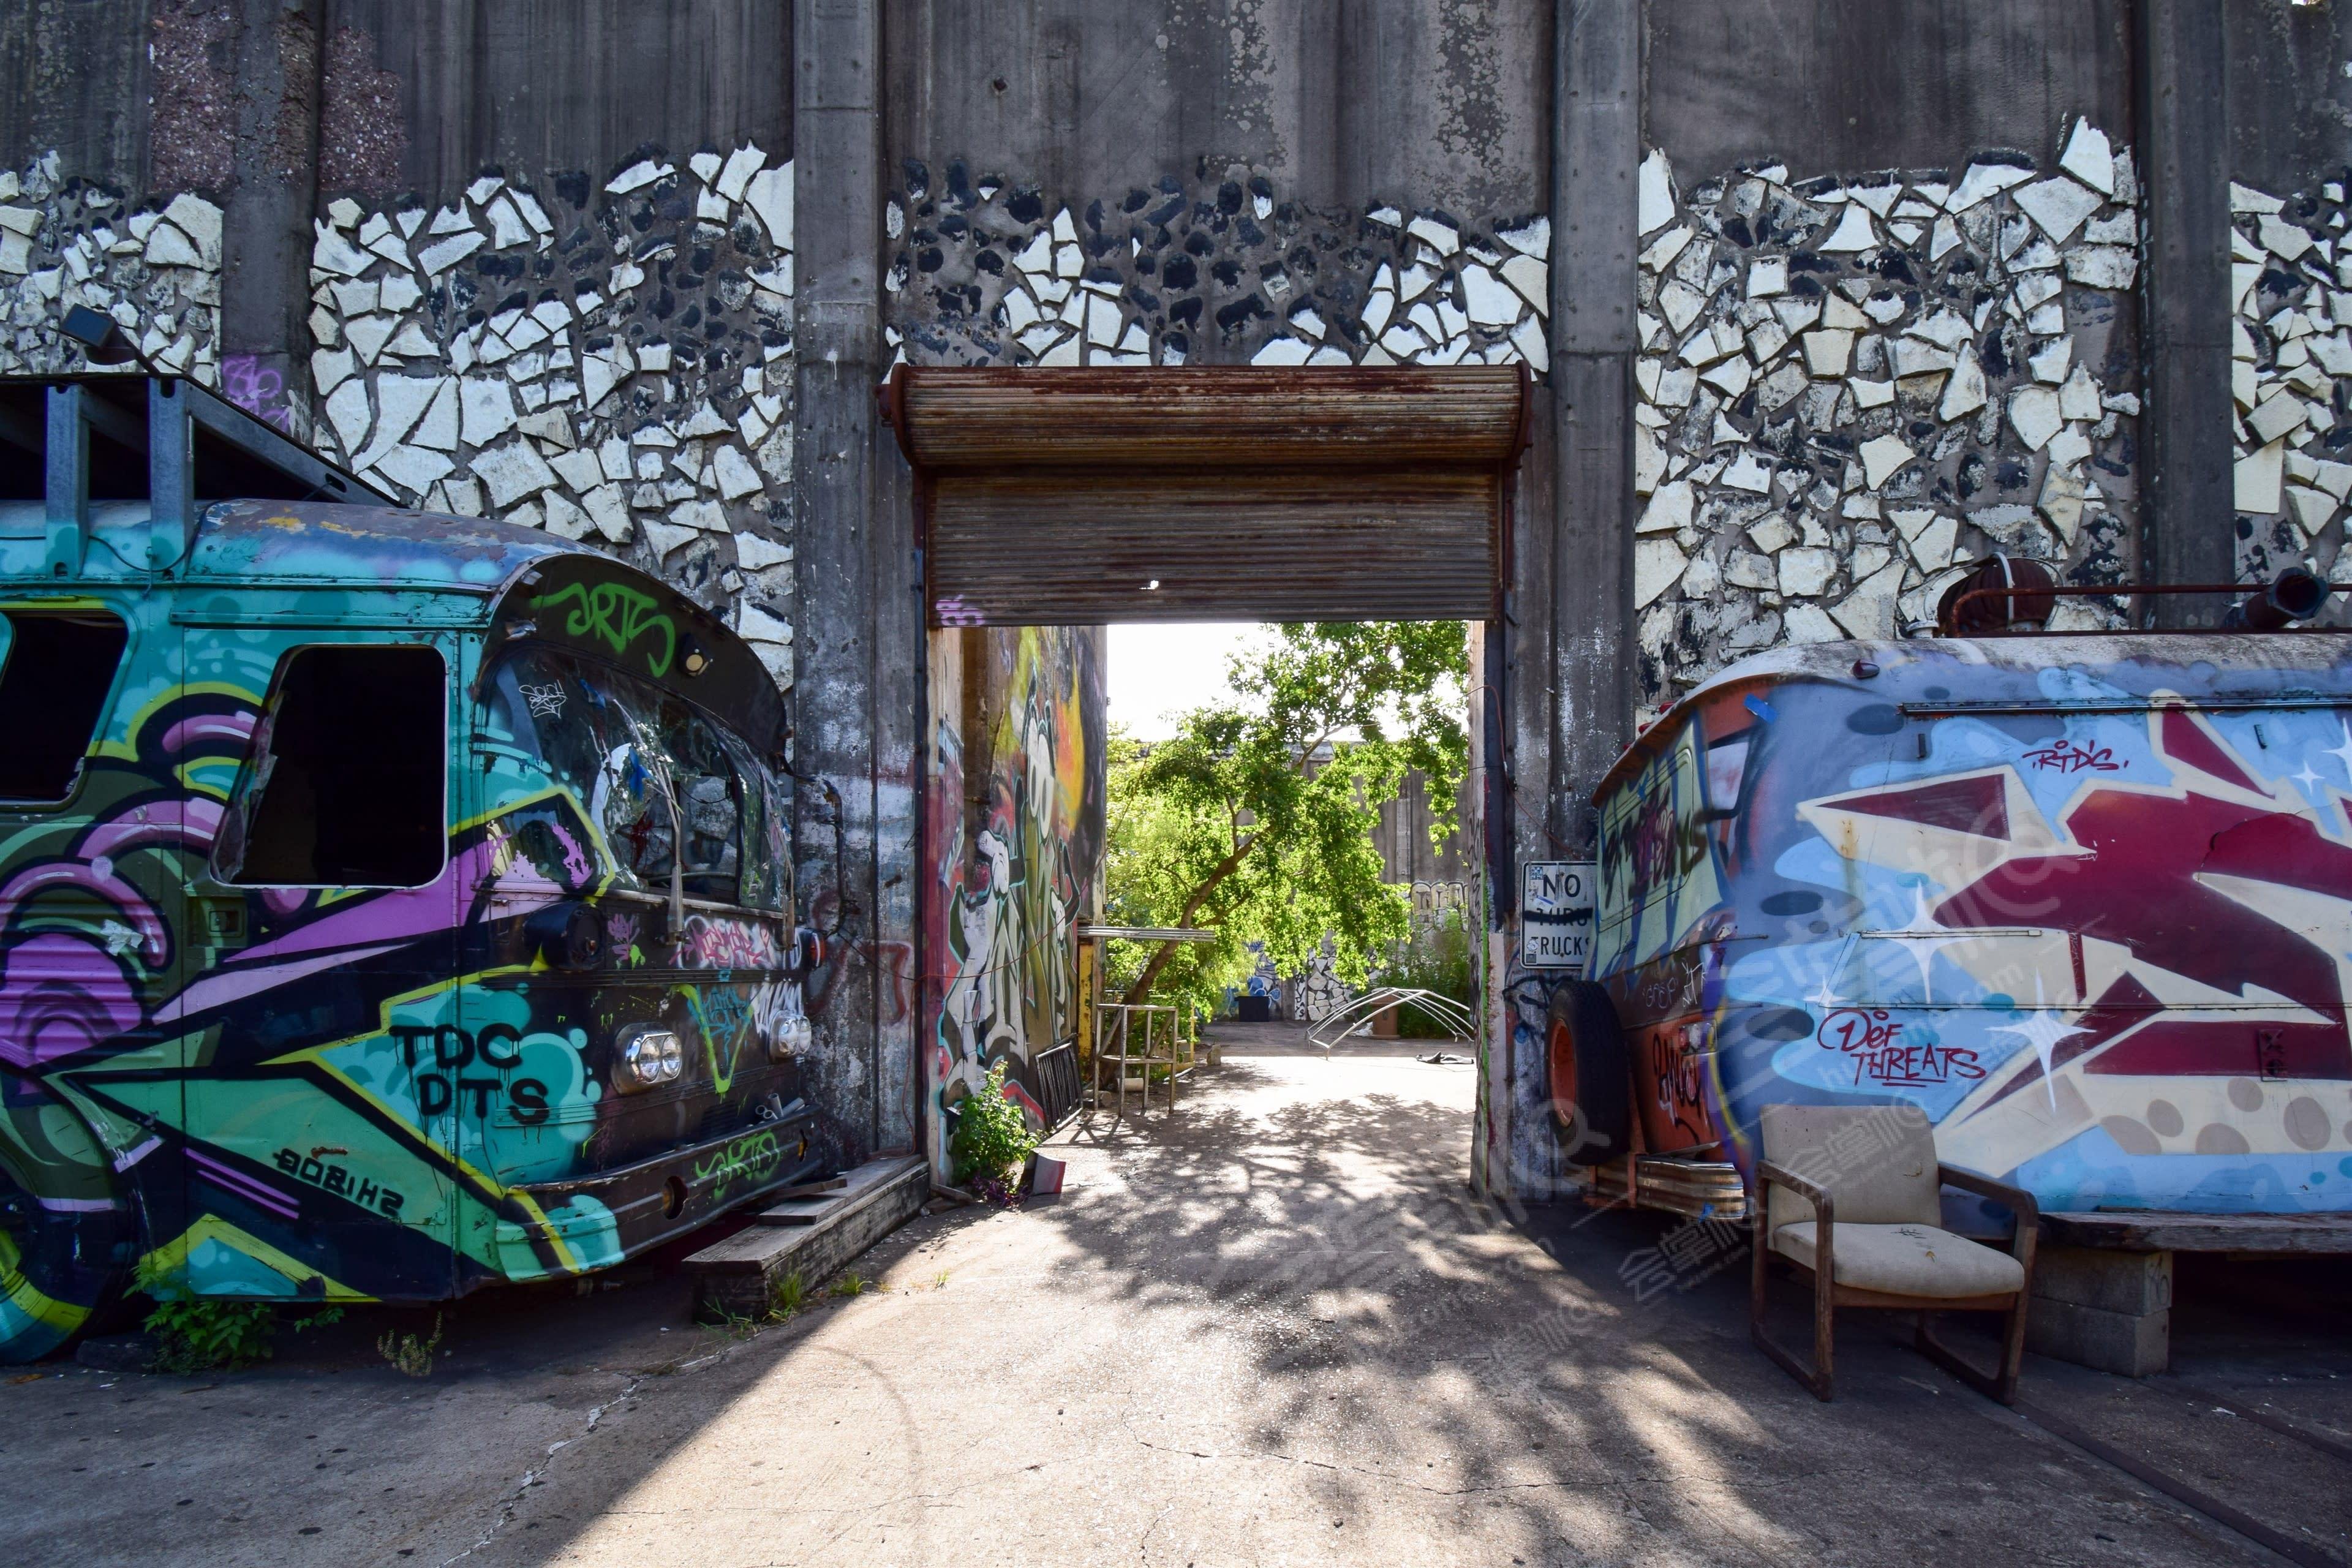 Post Apocalyptic Bombed Out Factory Event Venue w/ 30 Foot Graffiti Walls